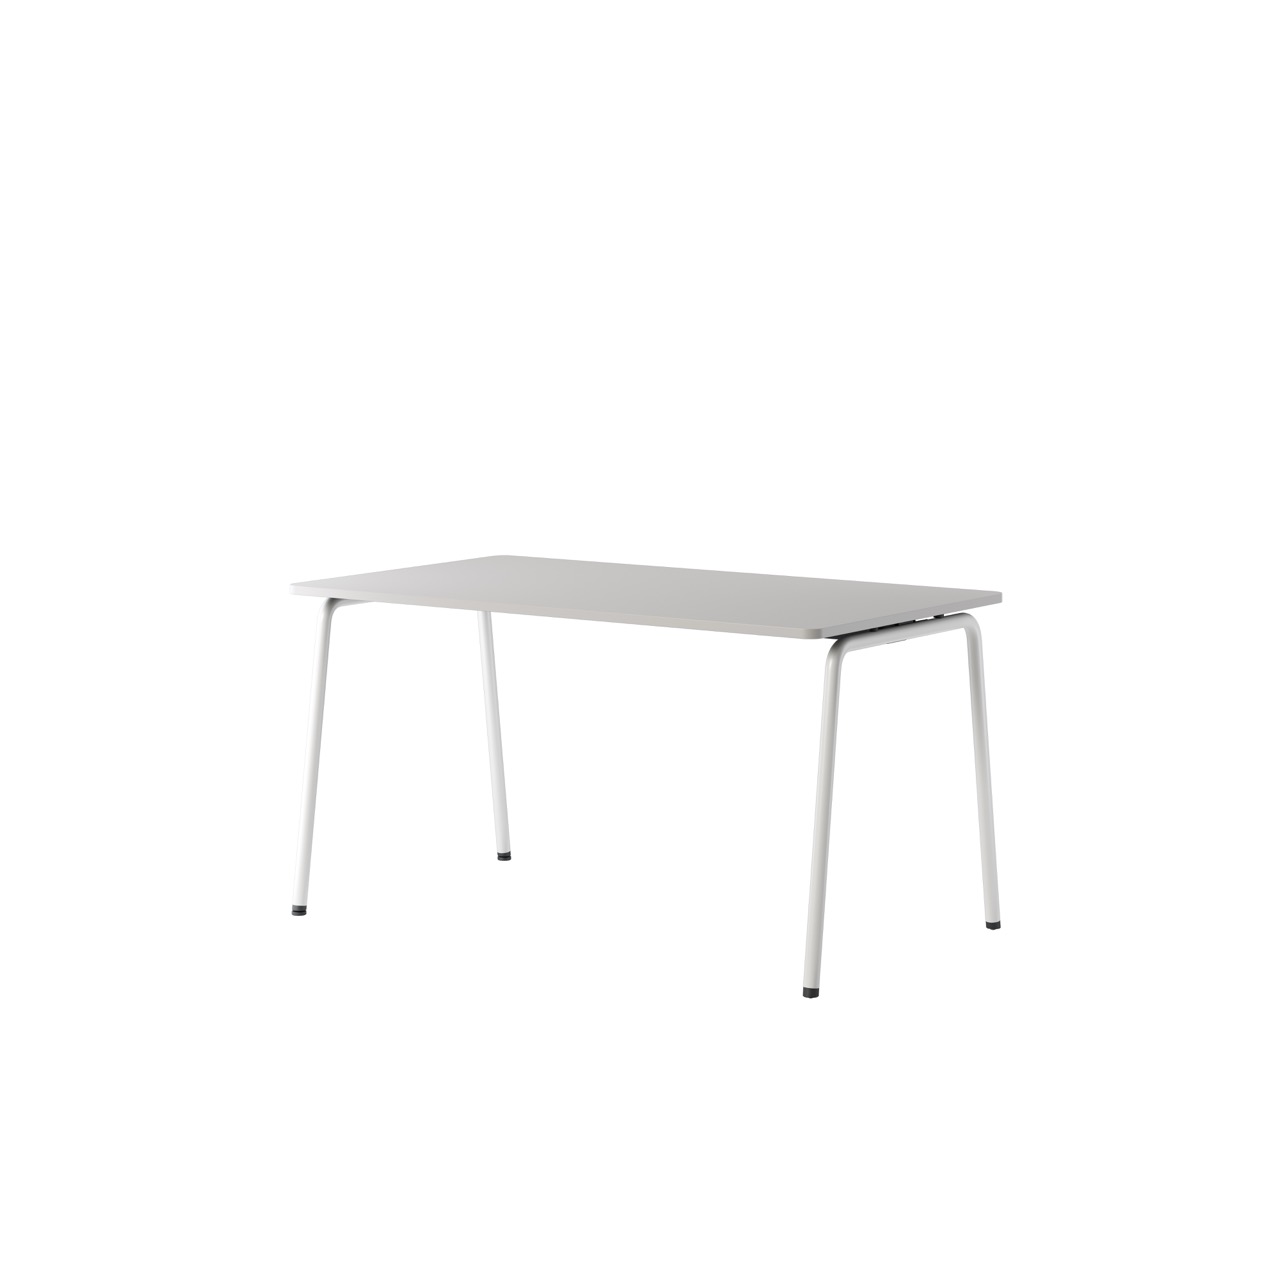 OCEE&FOUR - Tables - FourReal 74 - 140 x 80 - Angled - Packshot Image 3 Large